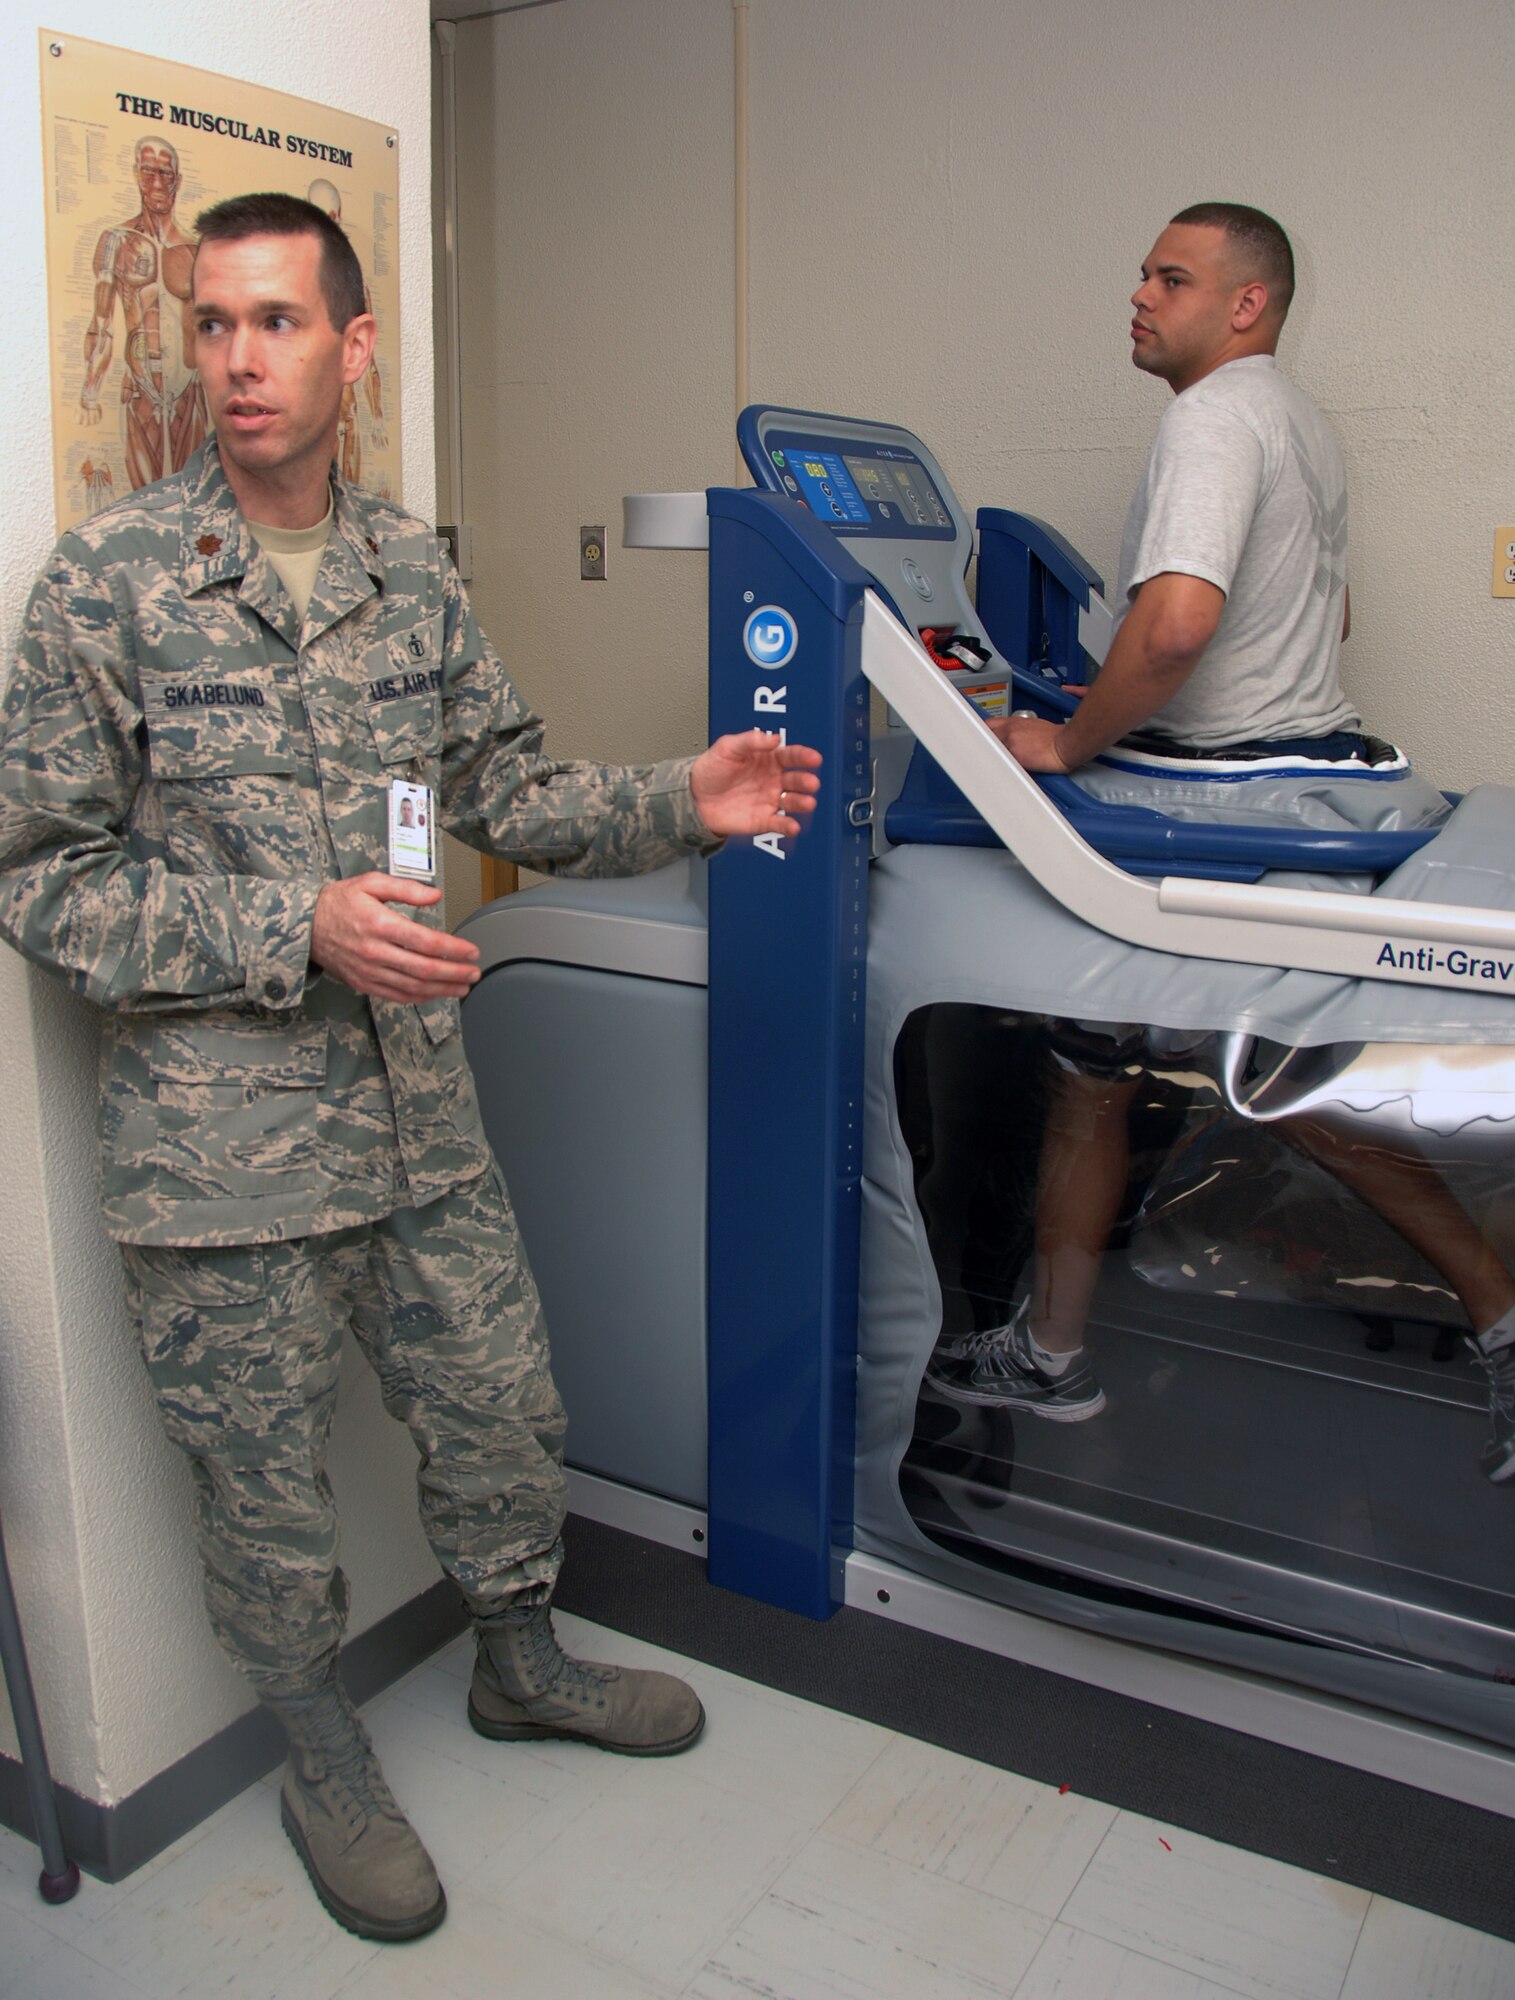 YOKOTA AIR BASE, Japan - Major Jeremy Skabelund, 374th Surgical Operations Squadron physical medicine element chief (left), explains how the AlterG Zero-Gravity Treadmill operates as Airman 1st Class Tony Jenkins, 374th MSGS physical therapy technician, demonstrates how to utilize the treadmill at Yokota Air Base, Japan May 11, 2011. (U.S. Air Force Photo/Airman 1st Class Katrina R. Menchaca)